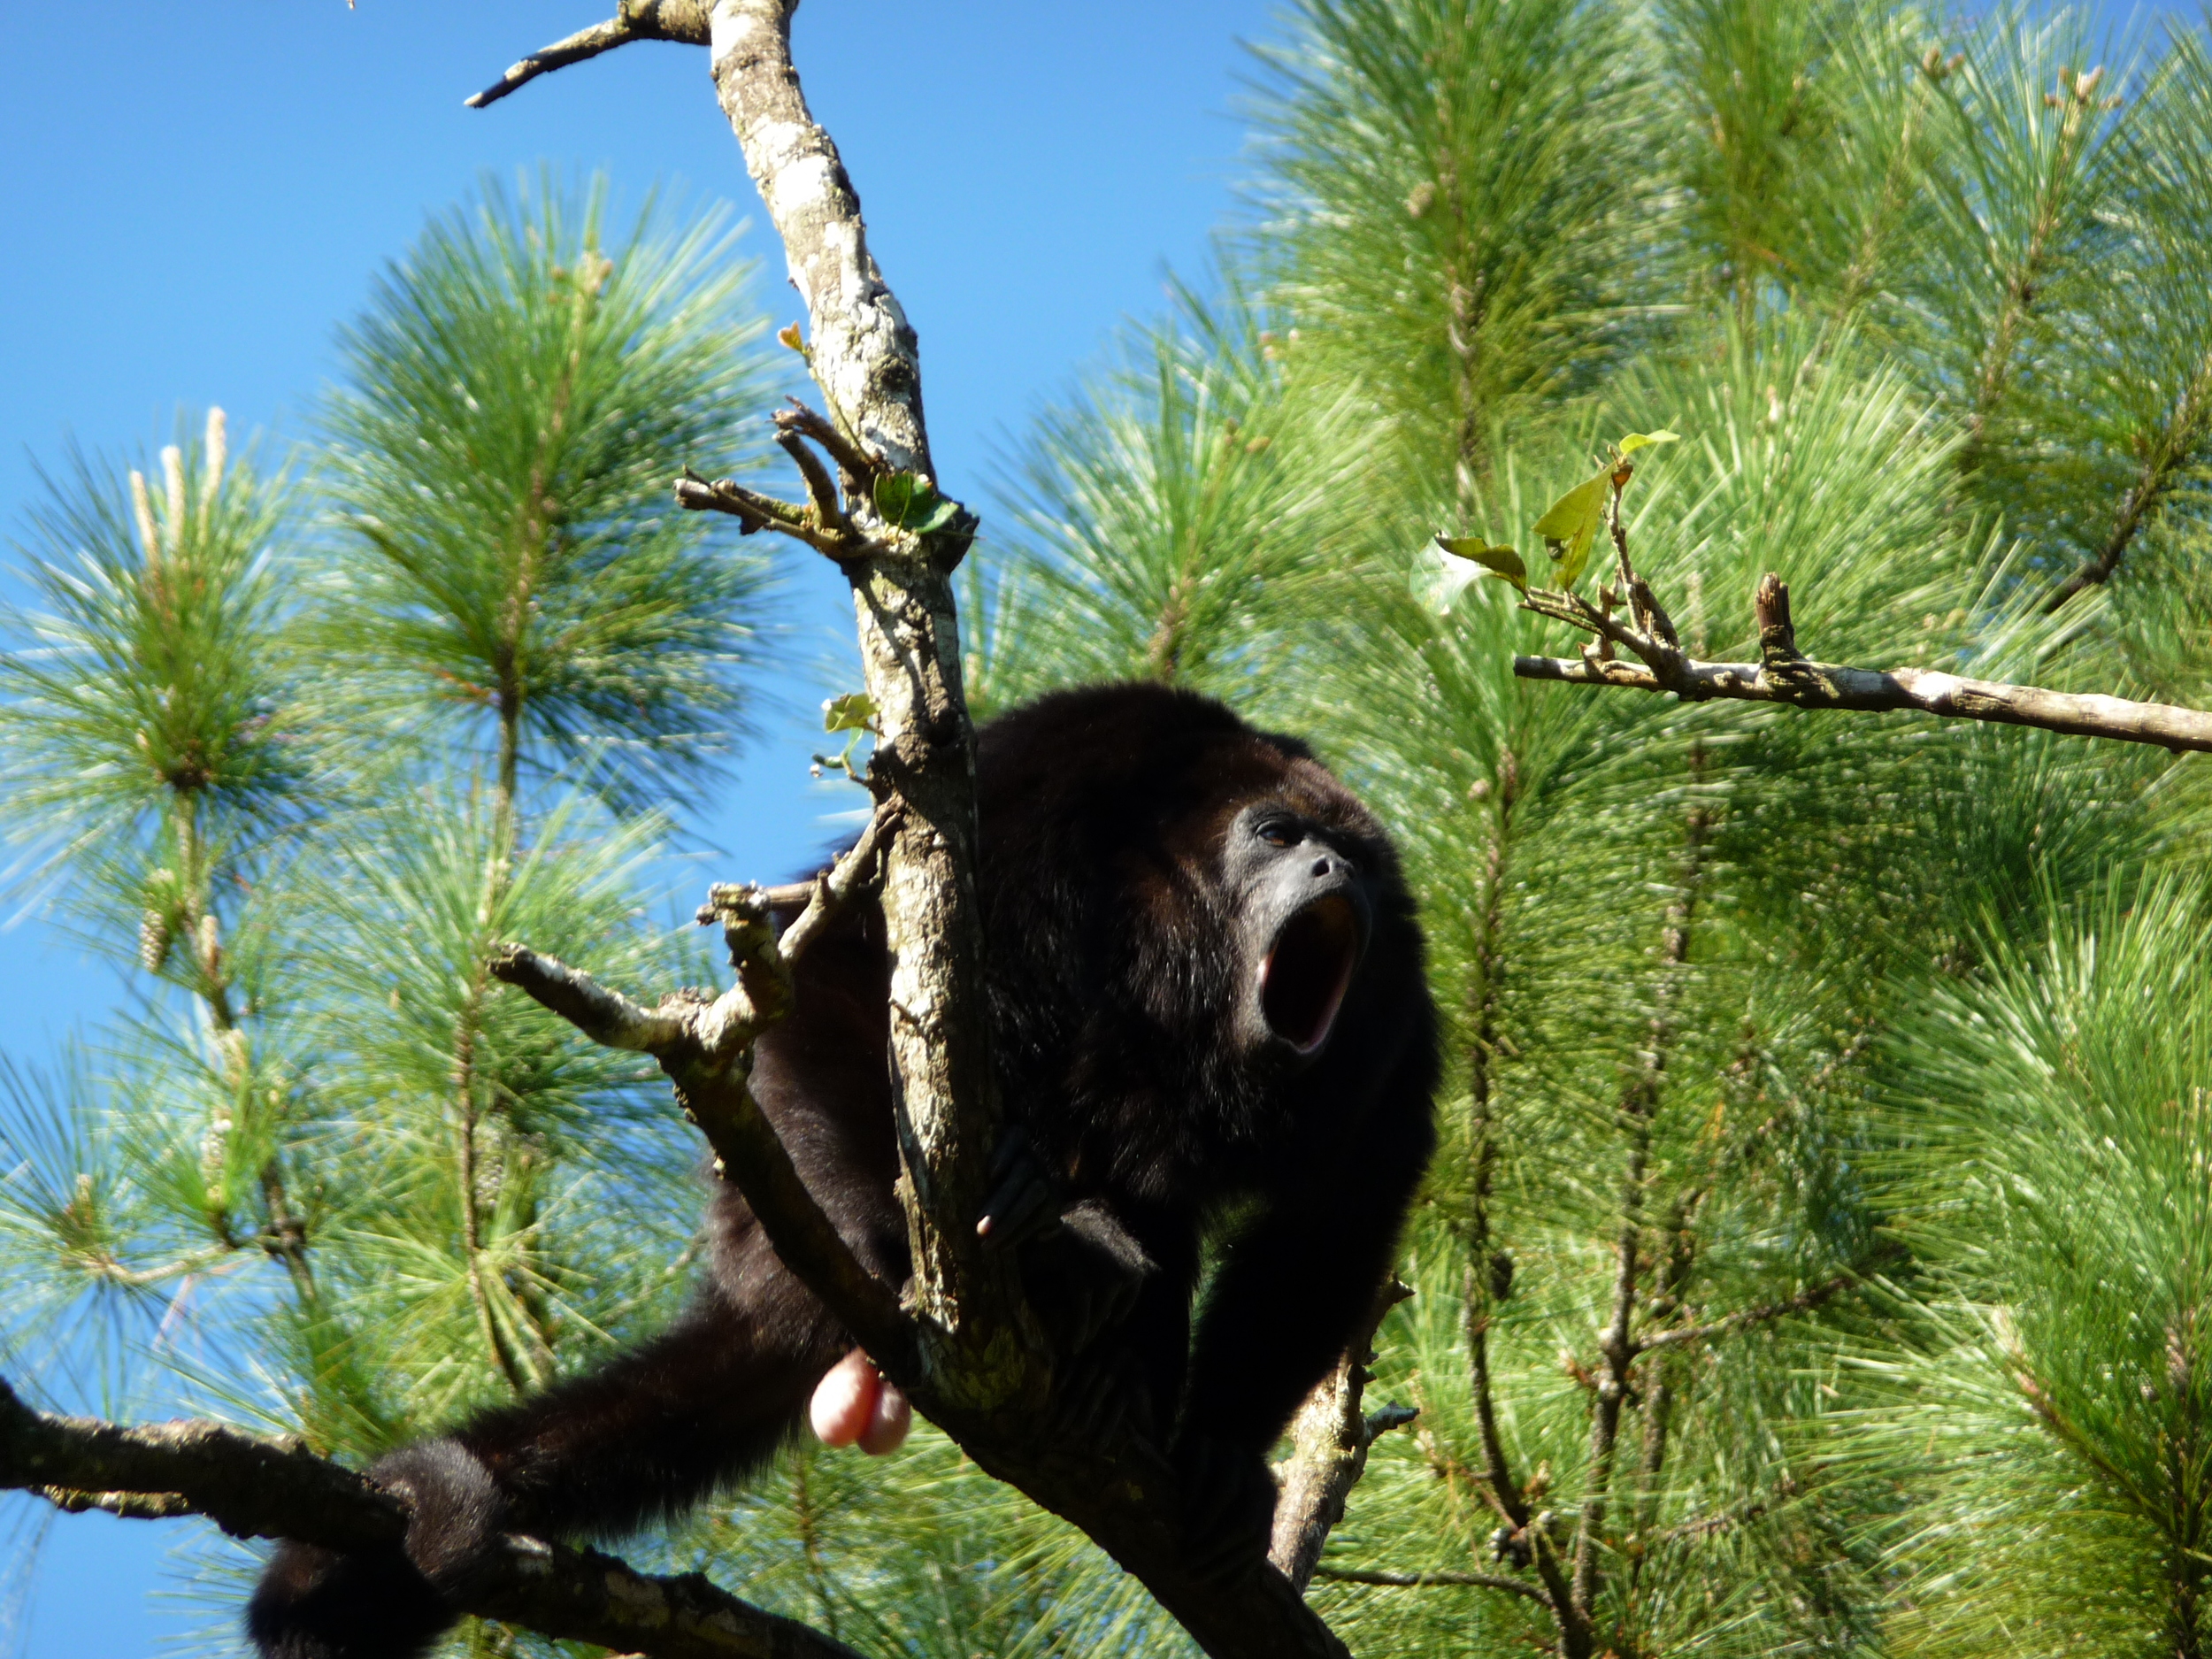 A Mexican Black Howler Monkey calls to other nearby males